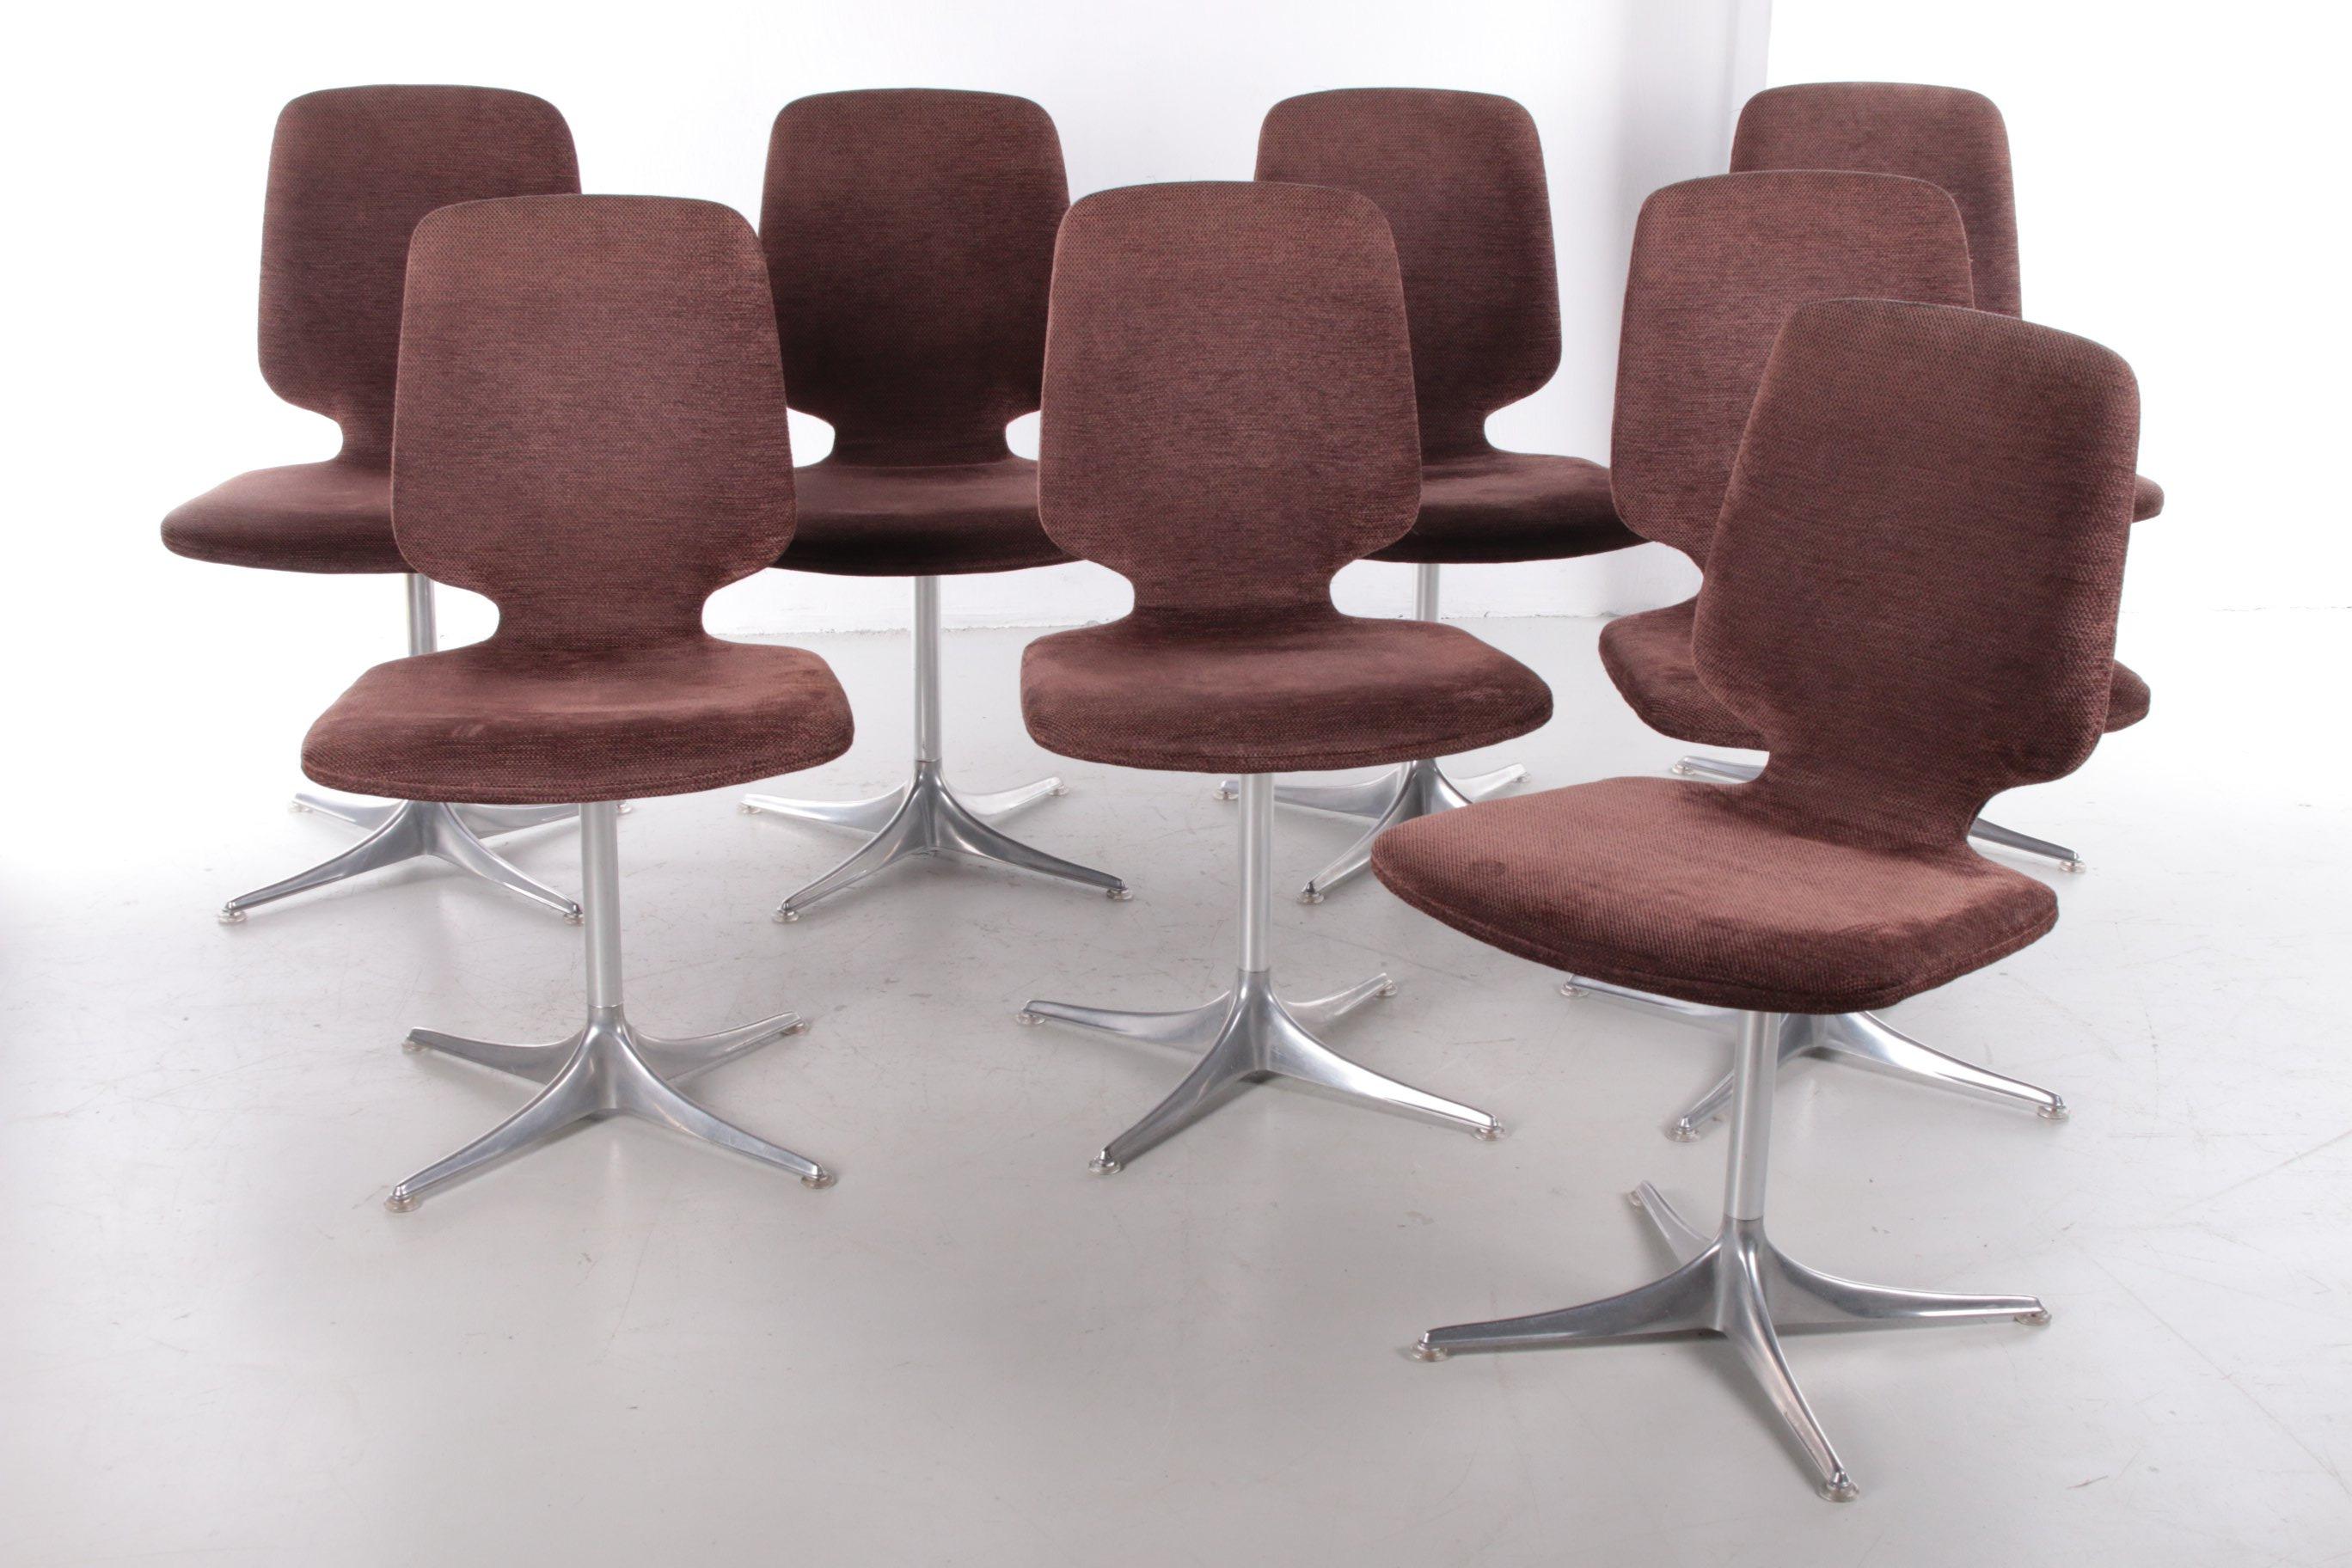 Set of 8 Chairs with Table by Horst Bruning Chair Model Sedia for COR 9